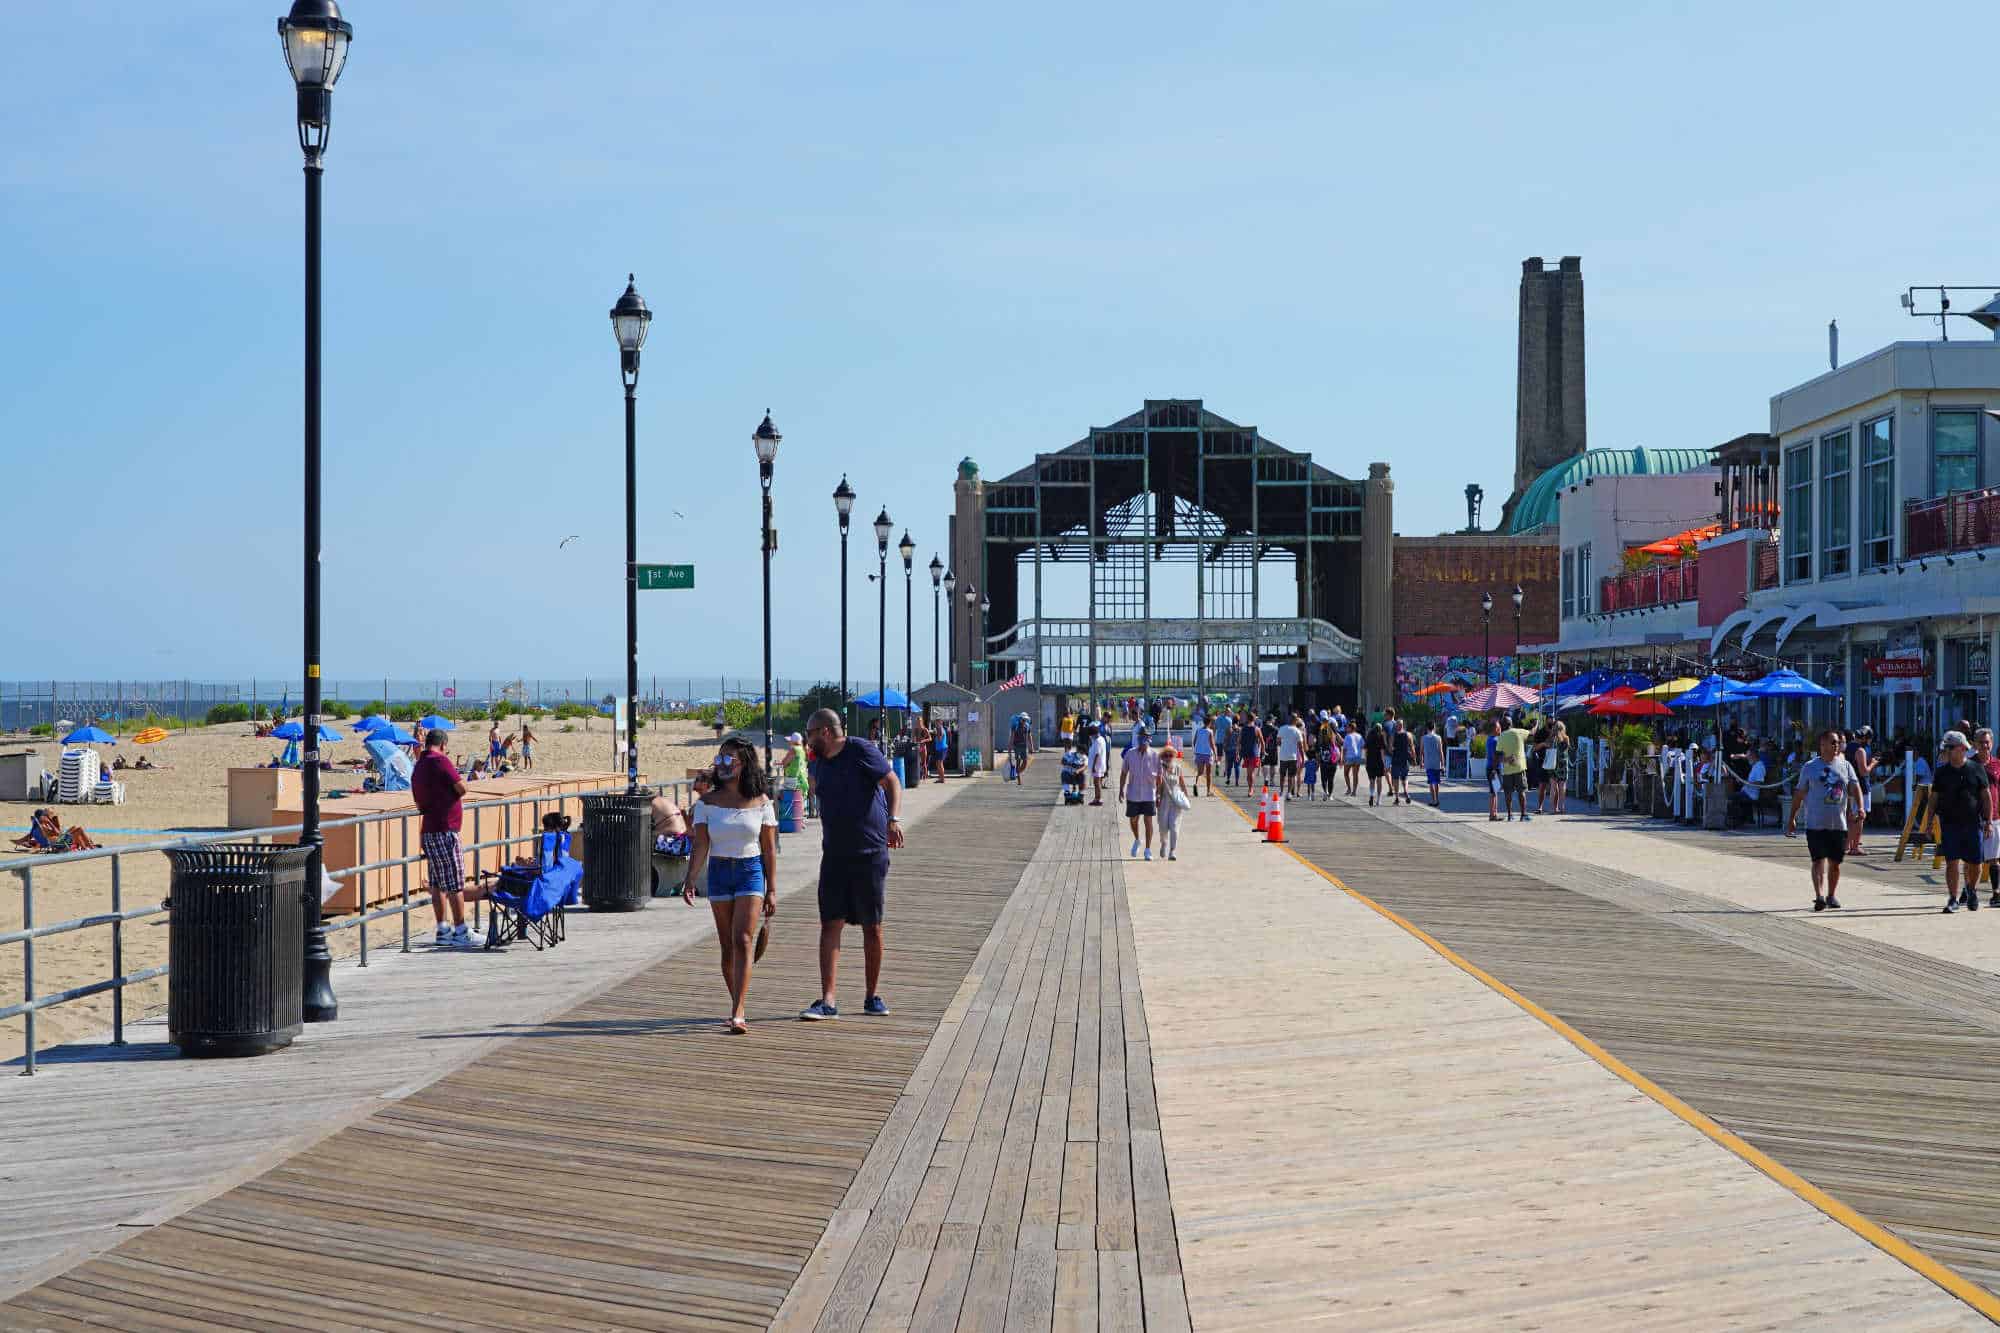 Lively and bustling atmosphere of the New Jersey boardwalk filled with tourists